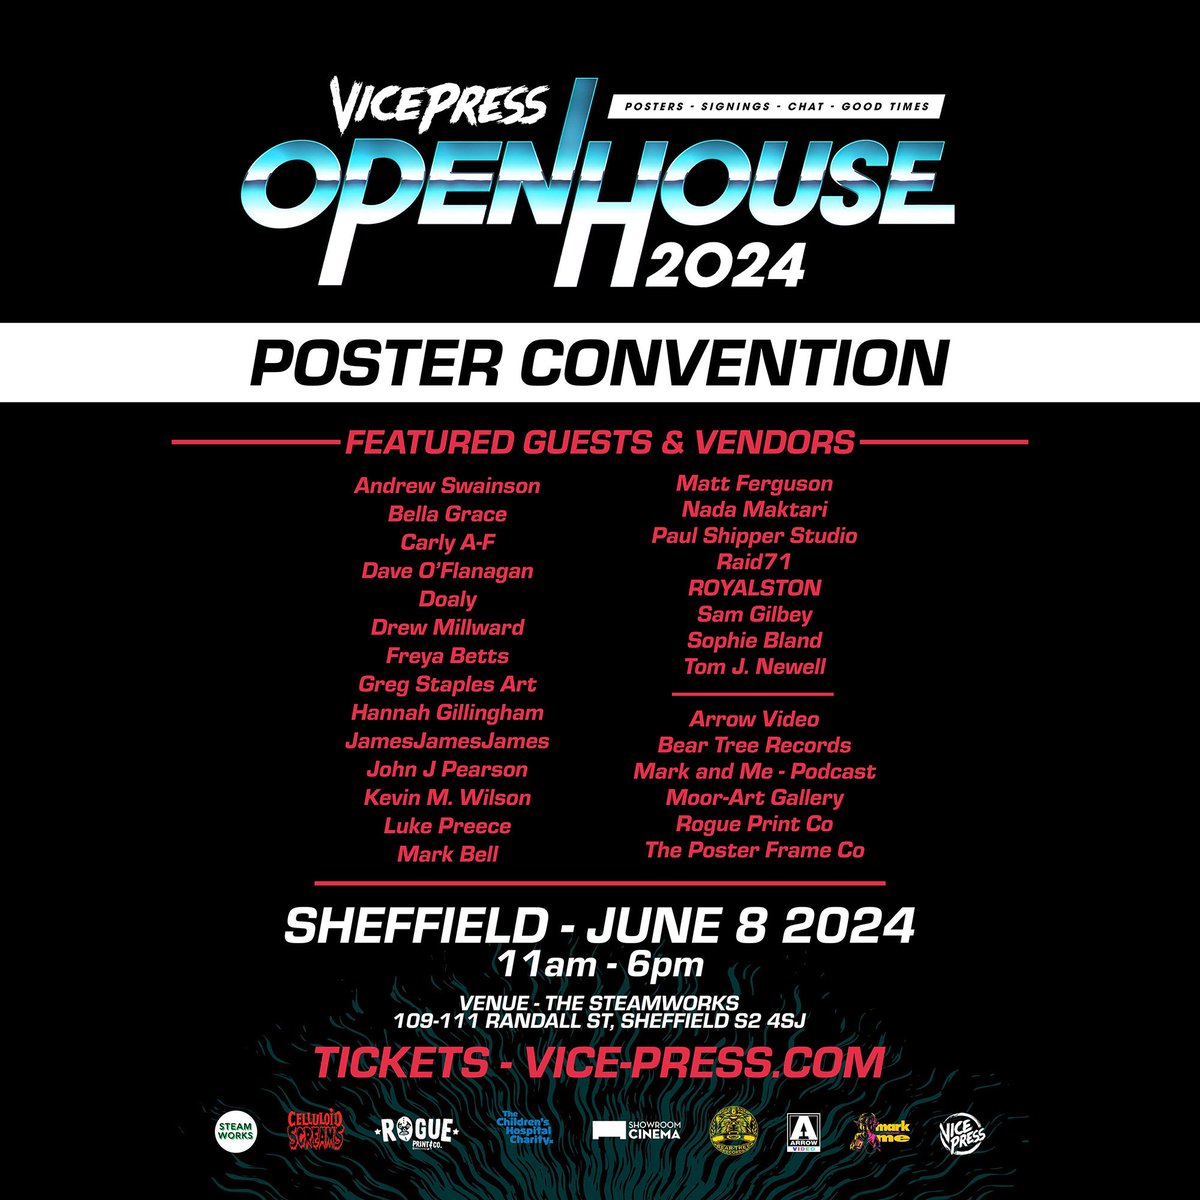 This year at Open House we are being joined by @DaveOFlanagan! We also have a brand new poster at the event by Dave which will be revealed soon. Join us on the 8th of June at The Steamworks, Sheffield! Vicepressopenhouse.co.uk